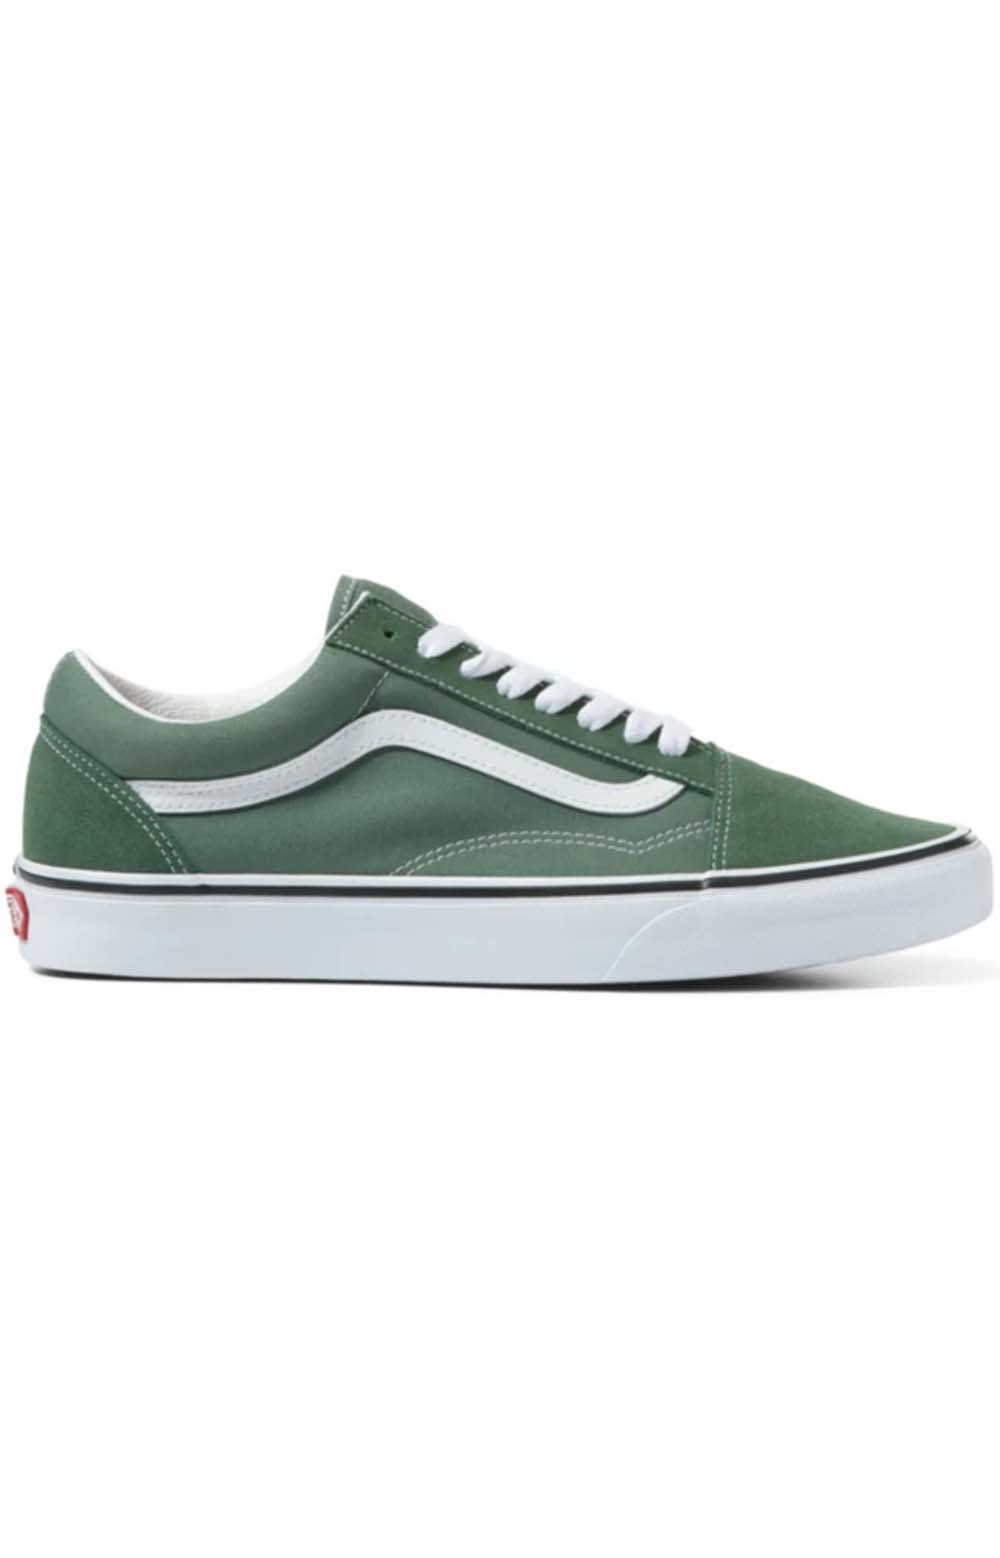 (KRSYQW) Color Theory Old Skool Shoes - Duck Green